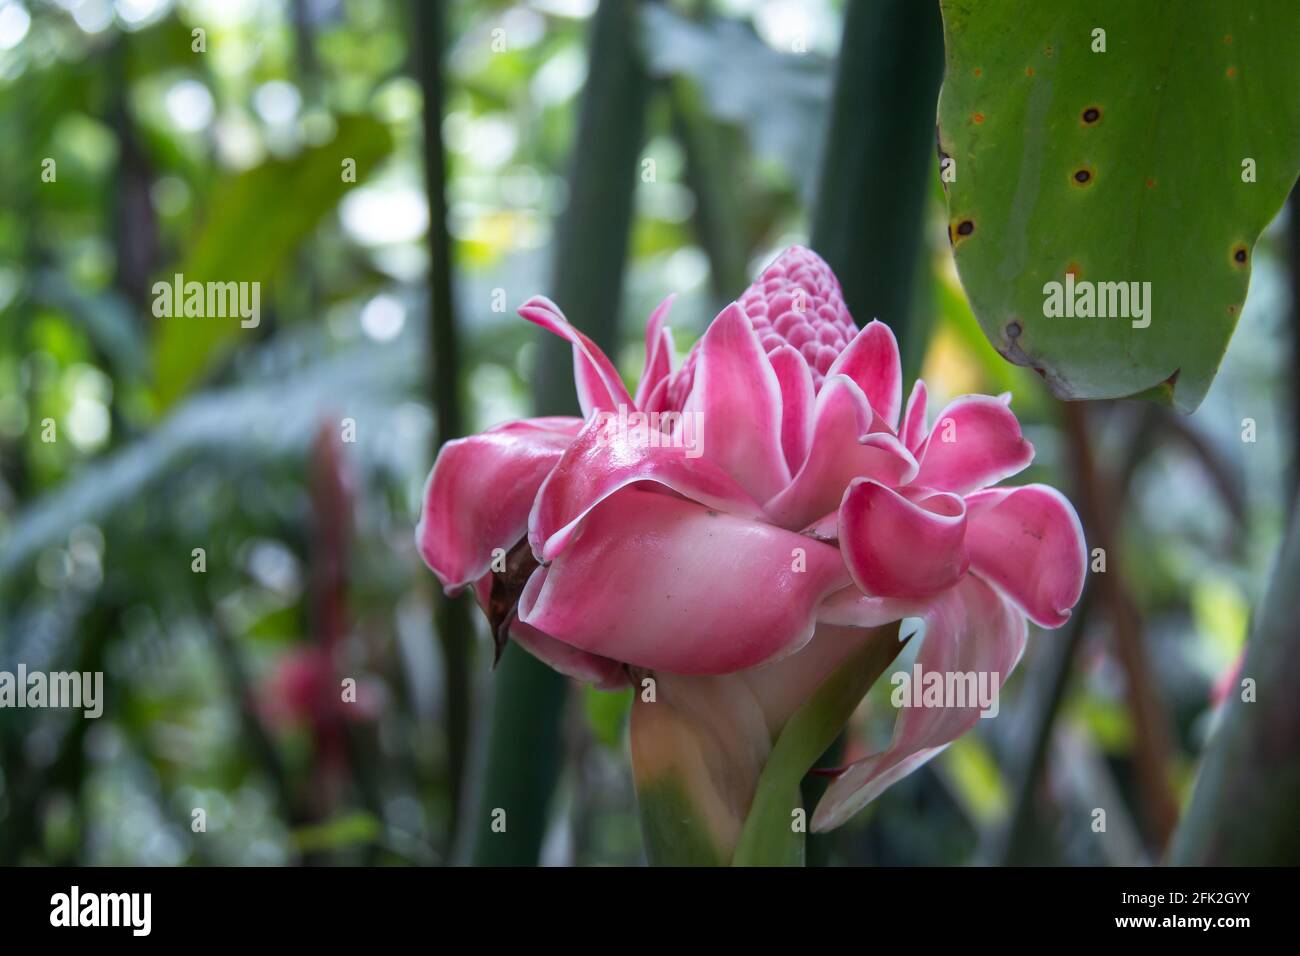 A single healthy torch ginger, or red ginger lily flower isolated among green leaves and branches in Barbados' Flower Forest. Pink, vibrant. Stock Photo